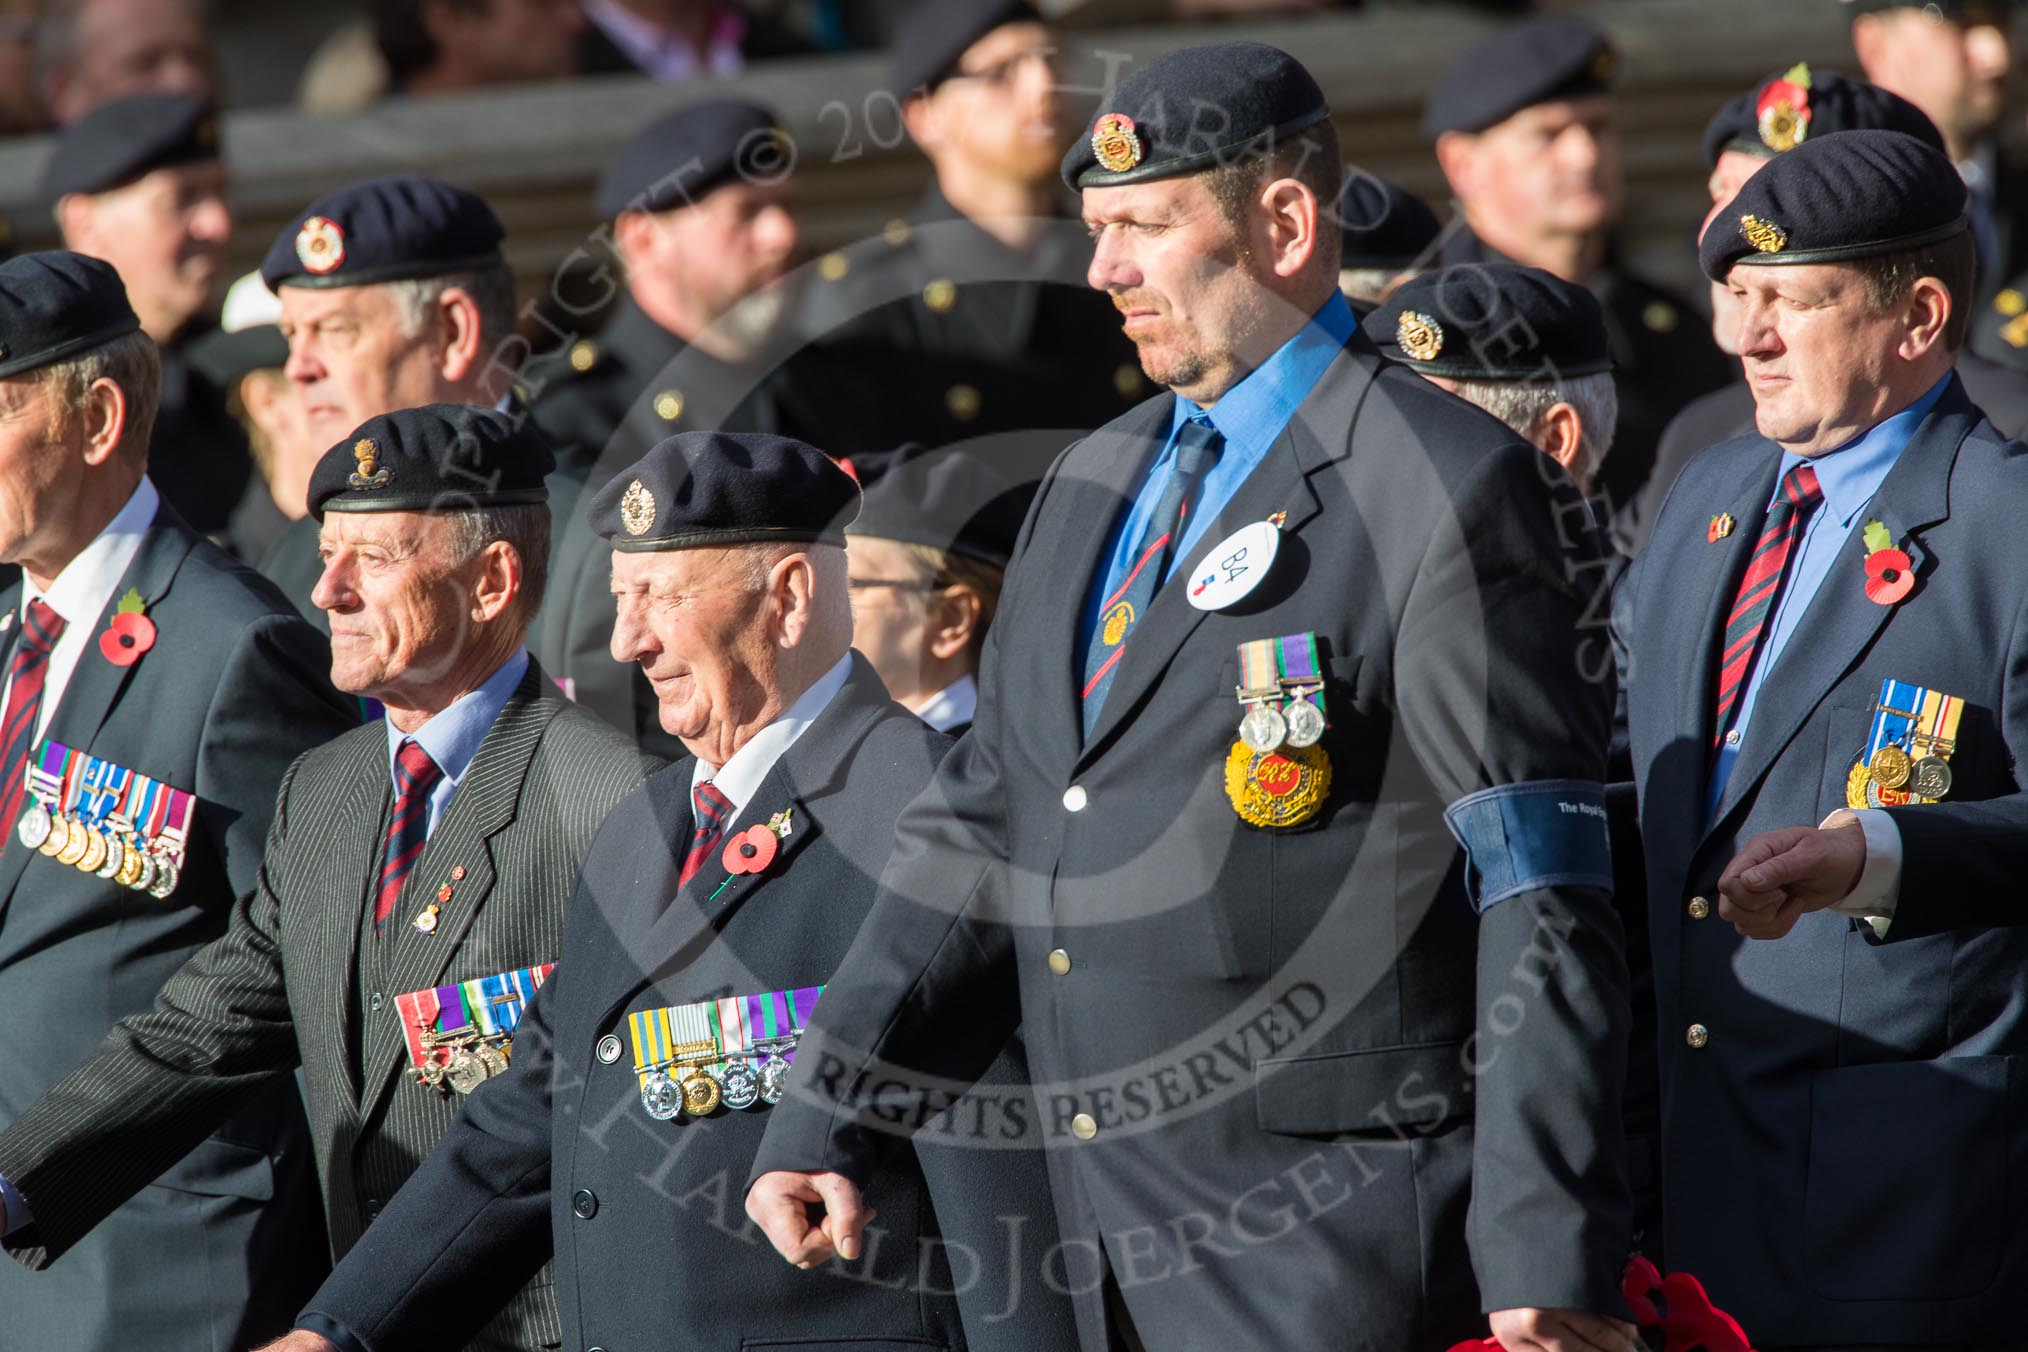 Royal Engineers Association (Group B4, 25 members) during the Royal British Legion March Past on Remembrance Sunday at the Cenotaph, Whitehall, Westminster, London, 11 November 2018, 12:06.